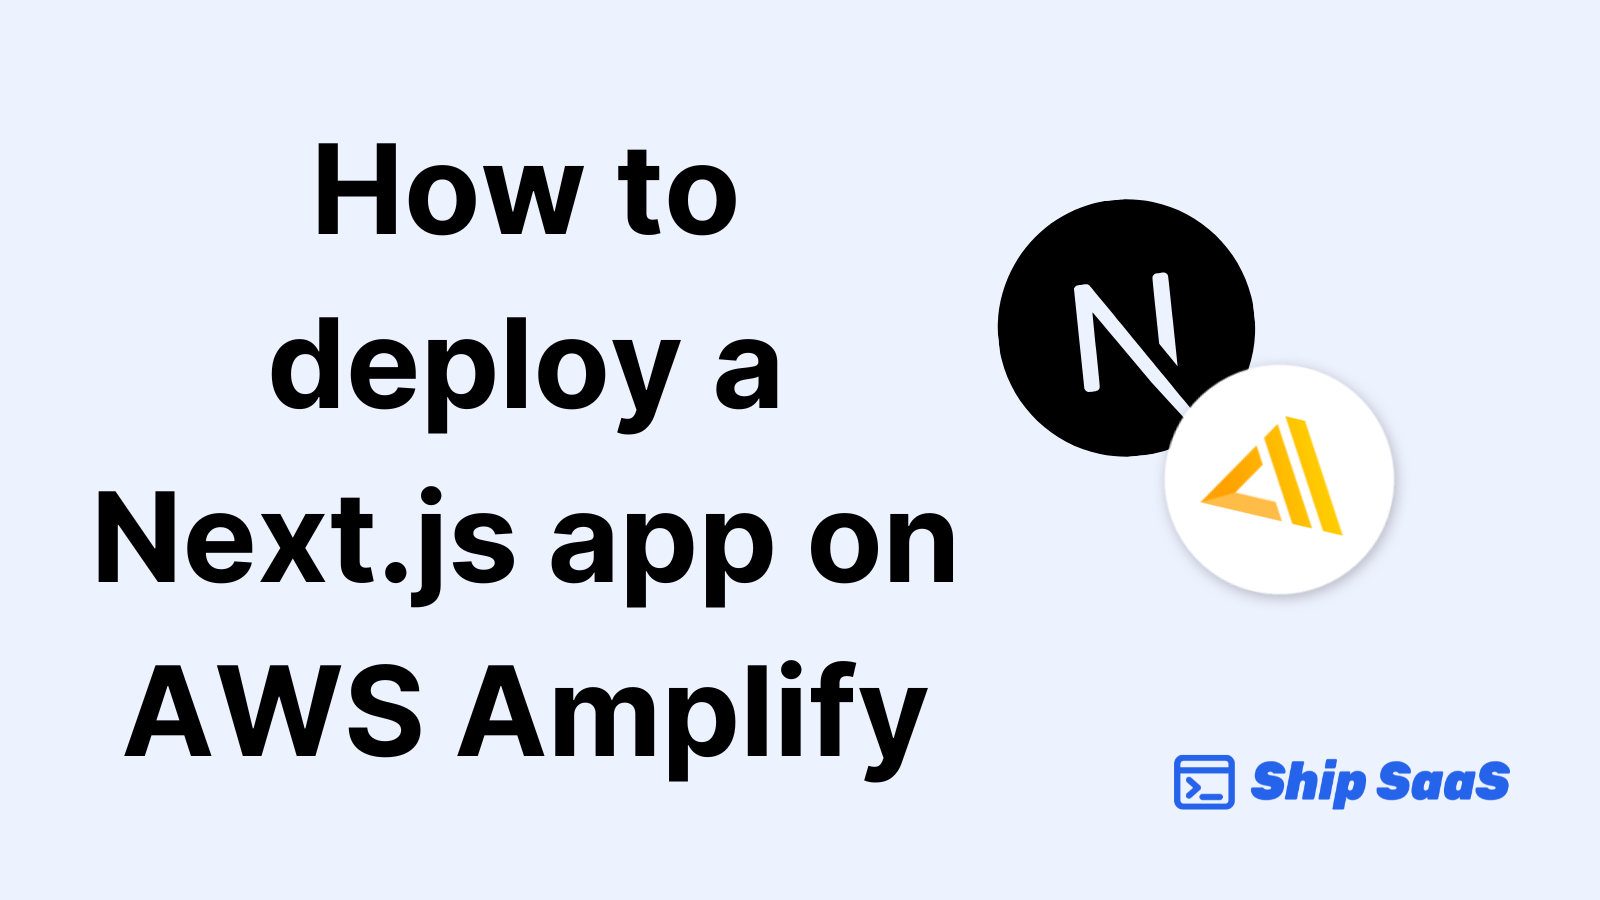 How to deploy a Next.js app on AWS Amplify